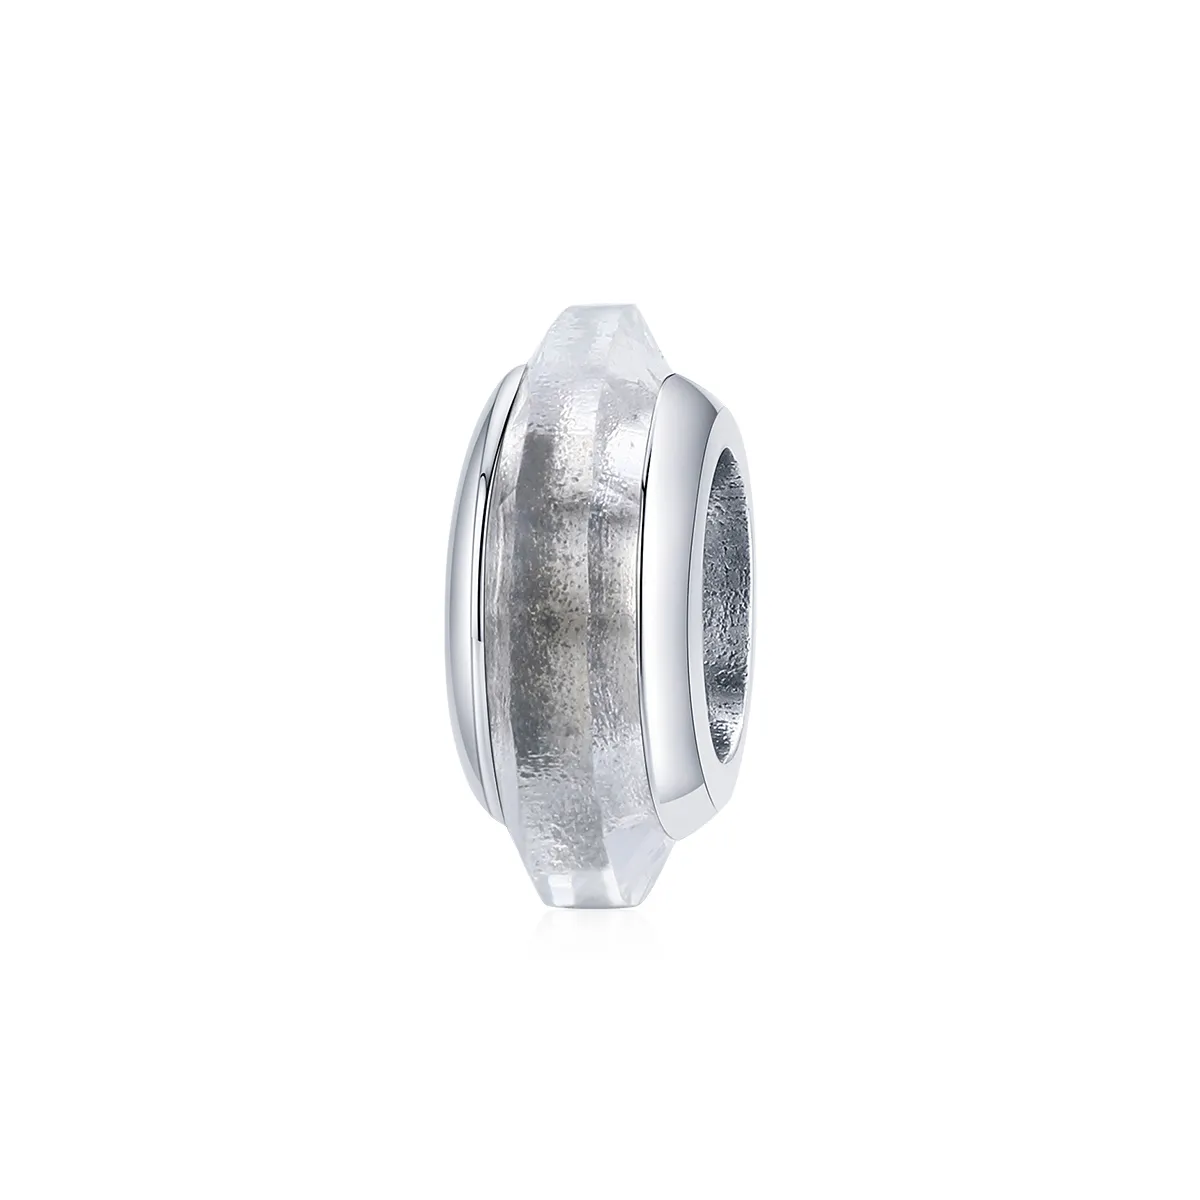 Pandora Style Silver Crysta Spacer Charm - SCC1818